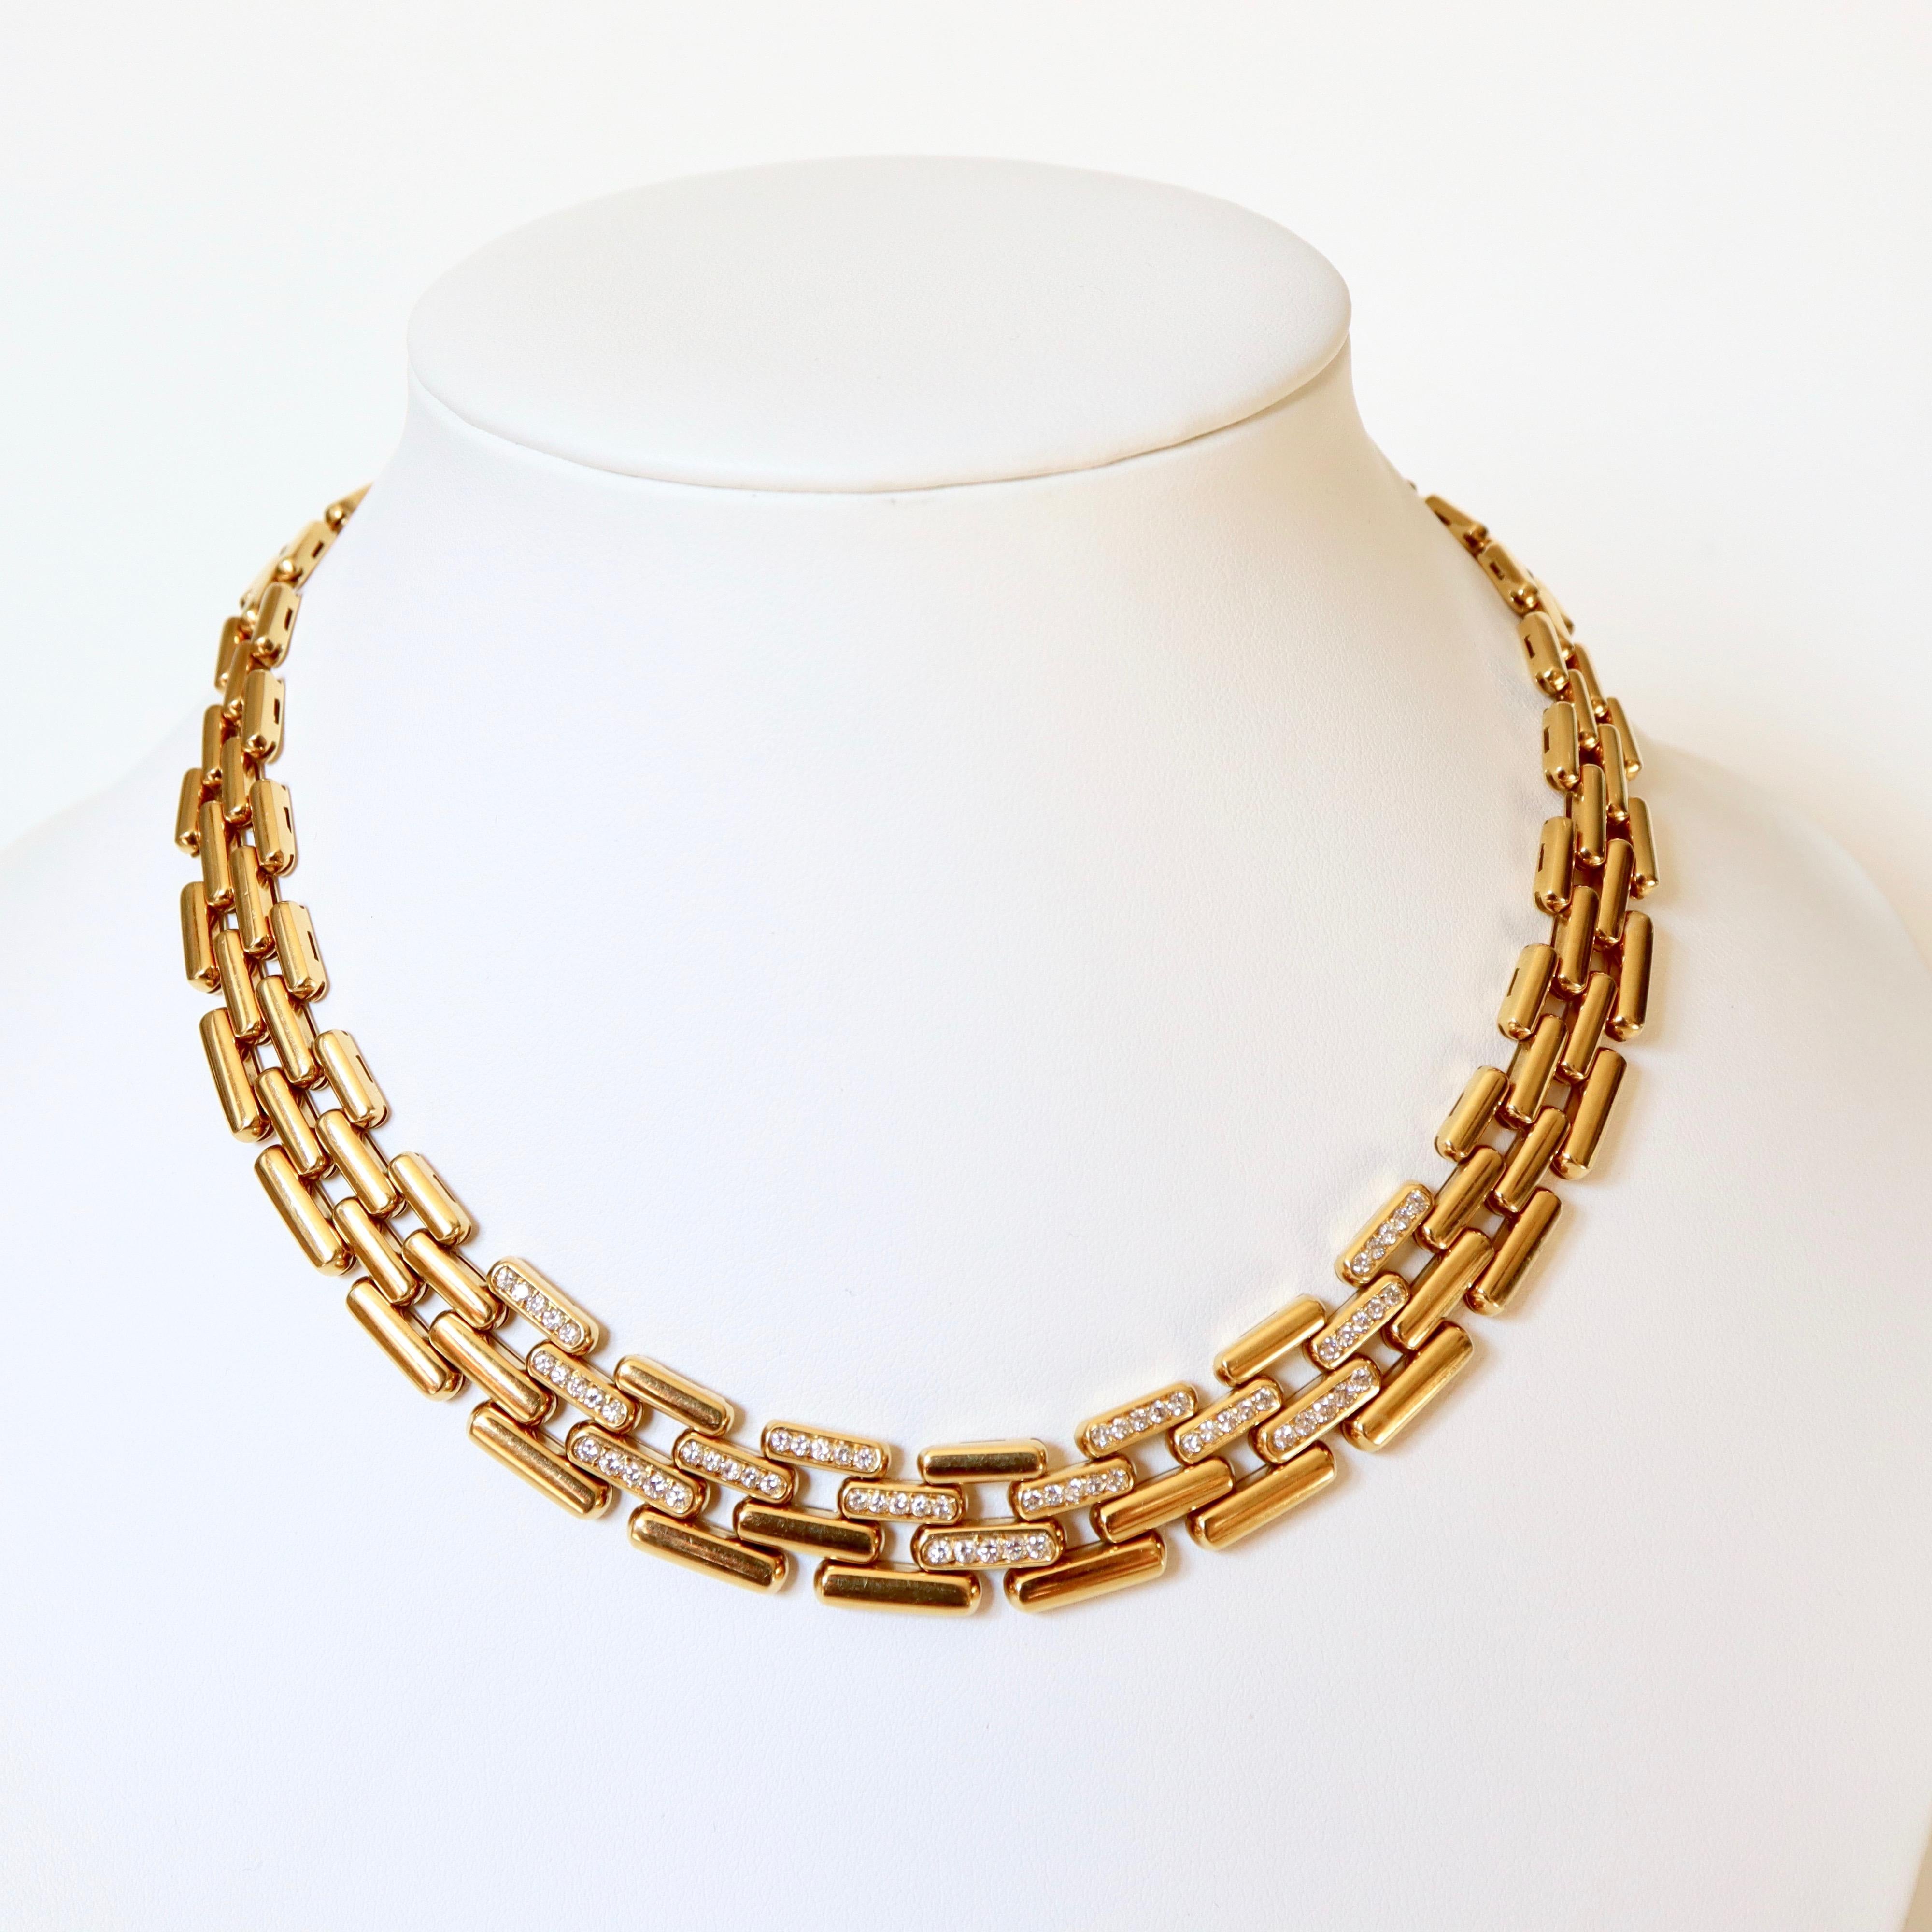 FRED Tank (Panther) articulated Mesh Necklace in 18-Carat yellow Gold and Diamonds of which 13 Links are Paved with 5 Diamonds for a Weight of Approximately 2.5 Carats.
Signed Fred  
Clasp 
Length: 39 cm 
Width at the Clasp: 0,8 cm and at the Front